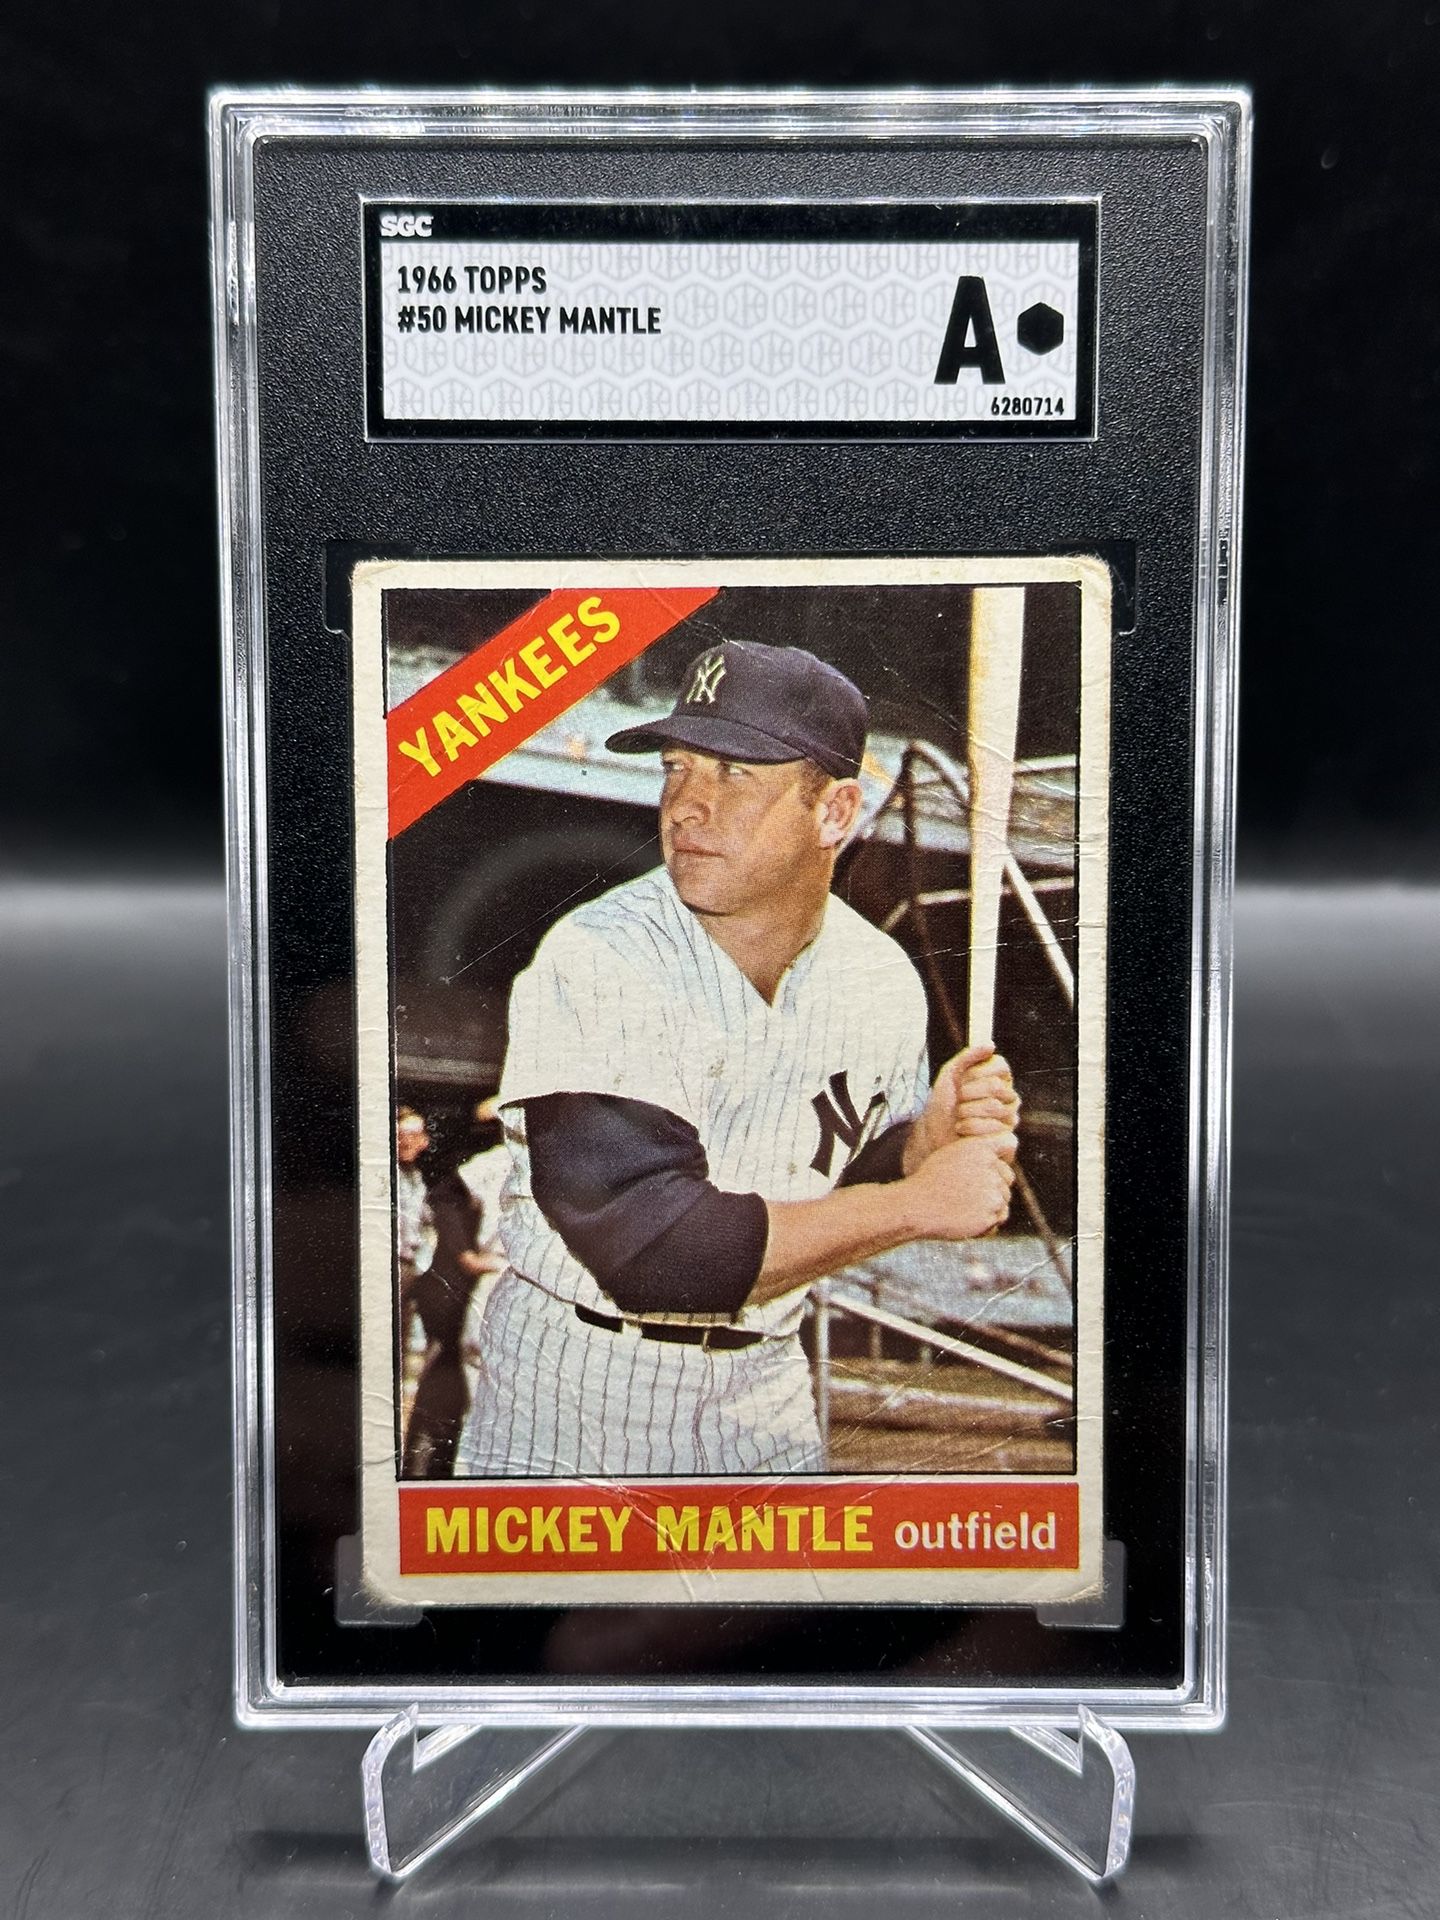 1966 Topps Mickey Mantle SGA Authenticated